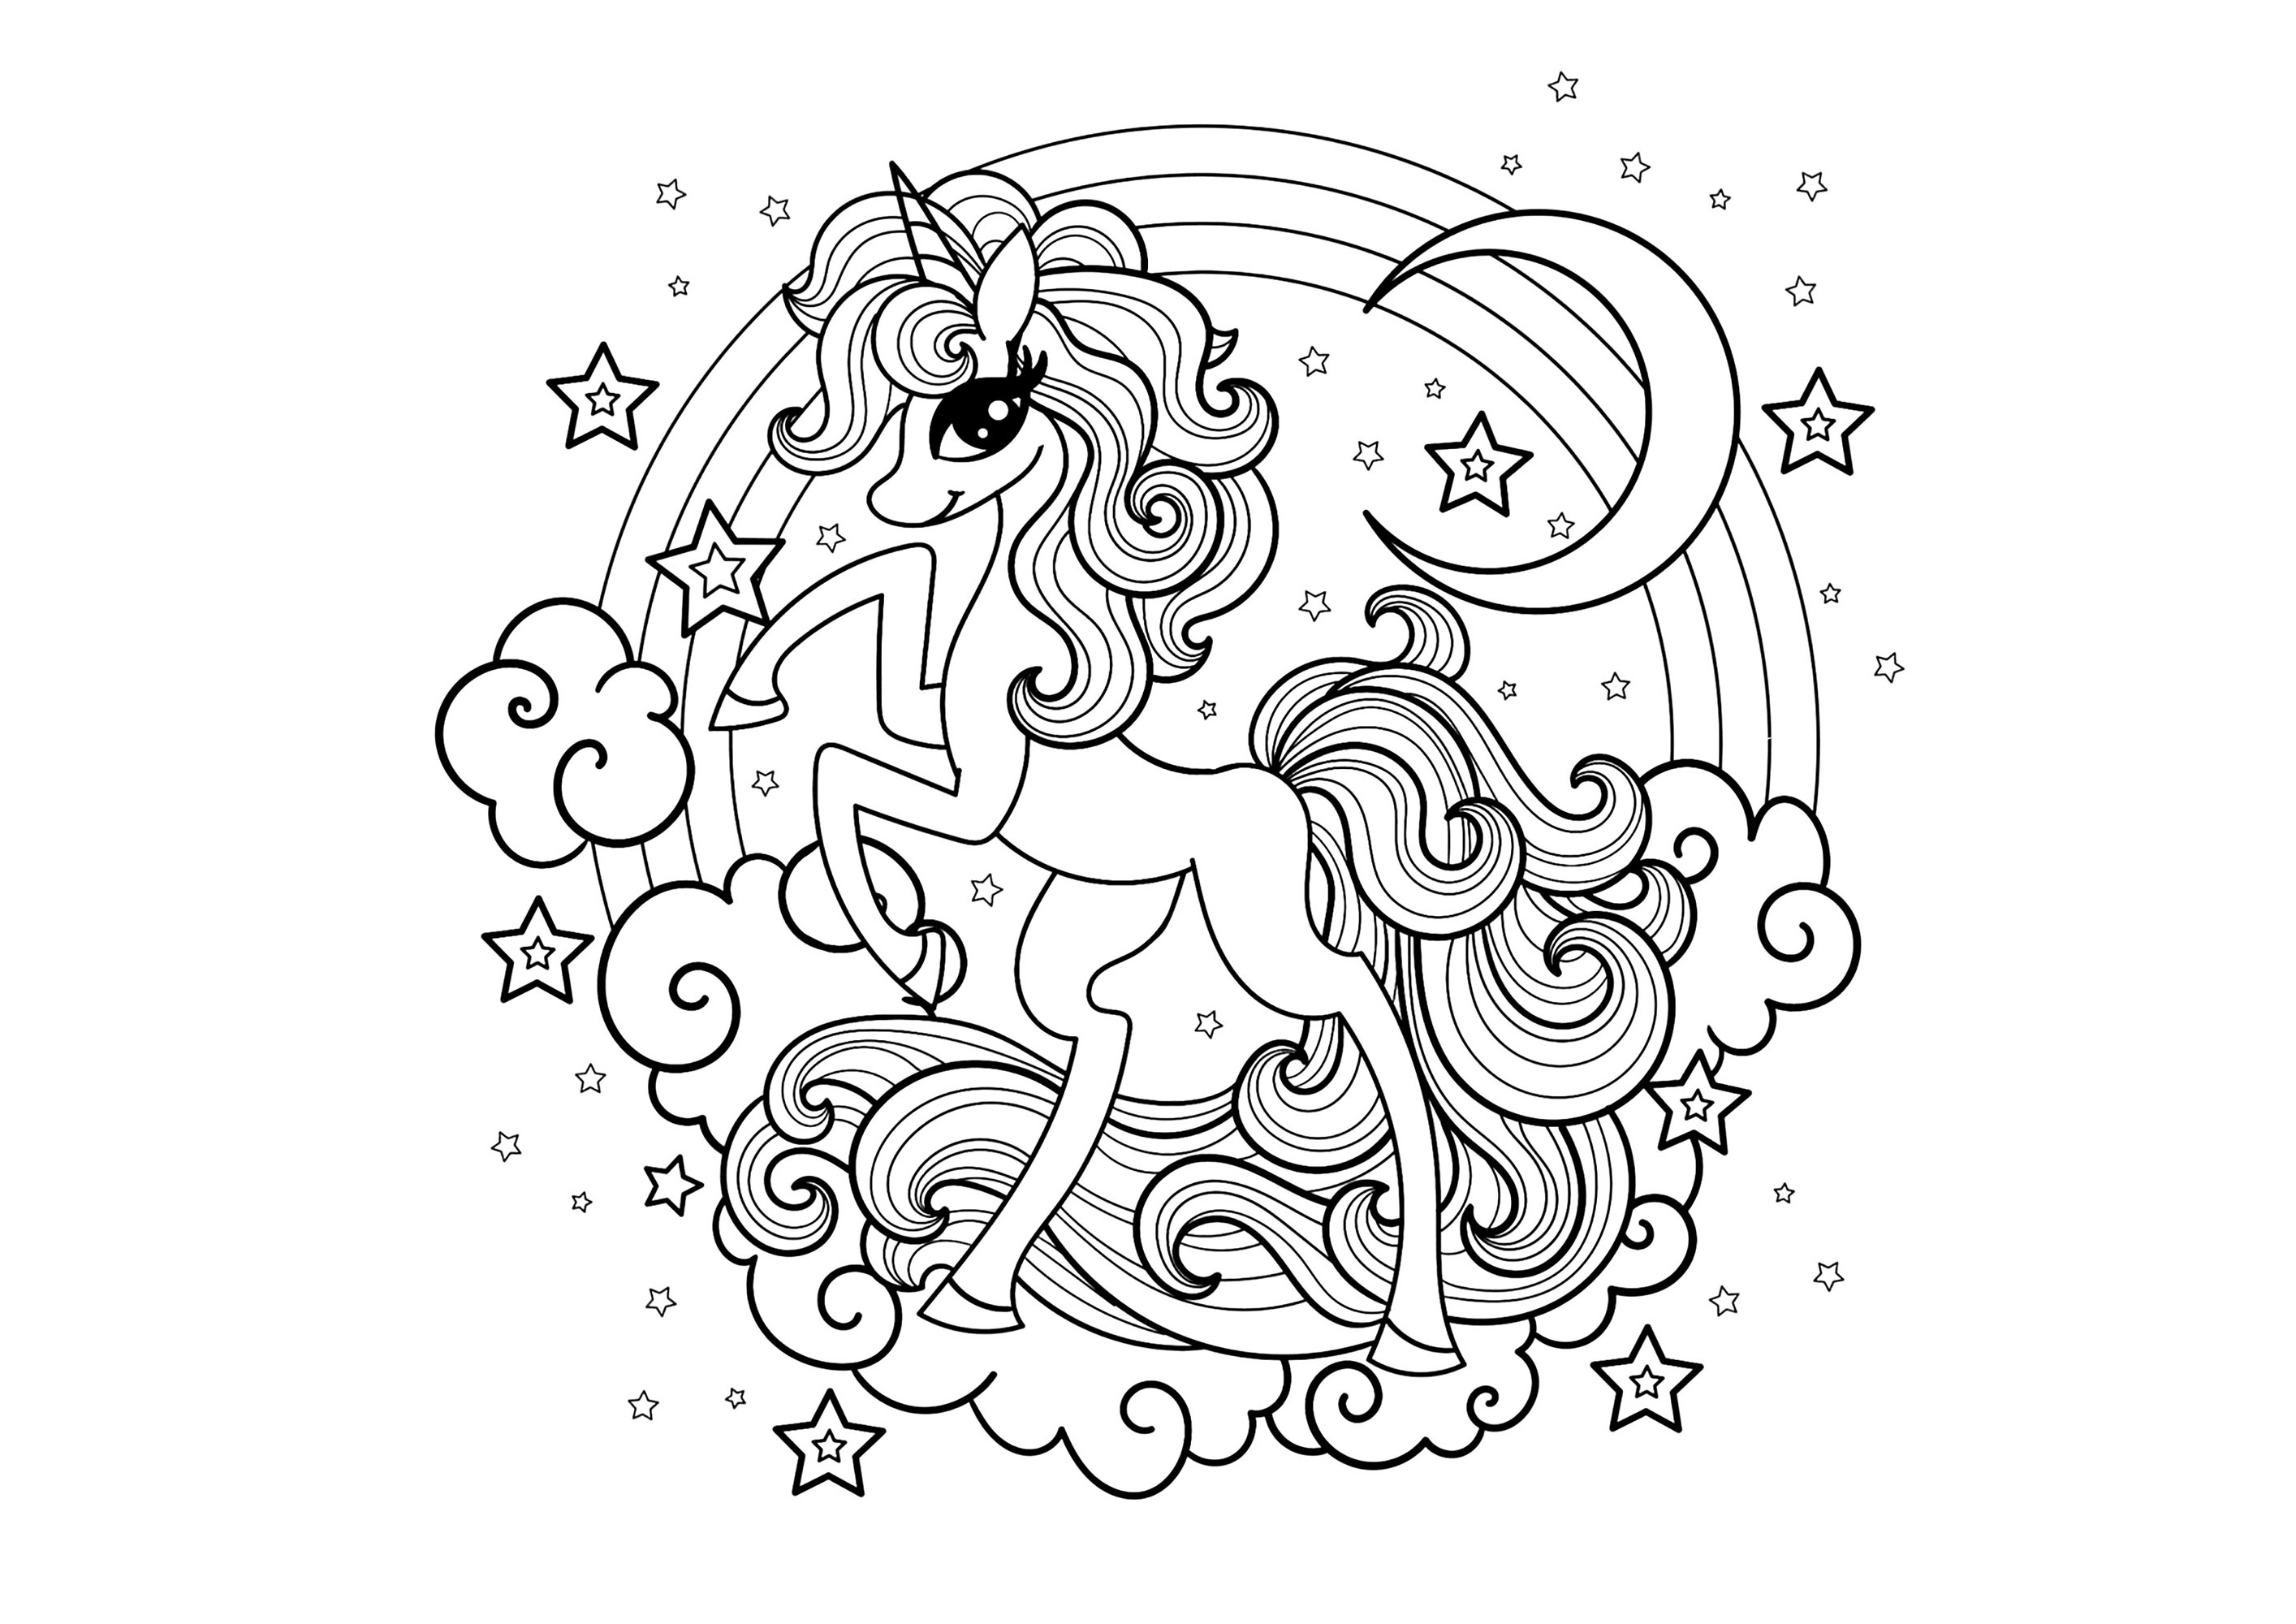 A Unicorn with a distinctive style. Pretty unicorn with rainbow, moon, clouds and stars, Artist : Zerlina1973   Source : 123rf